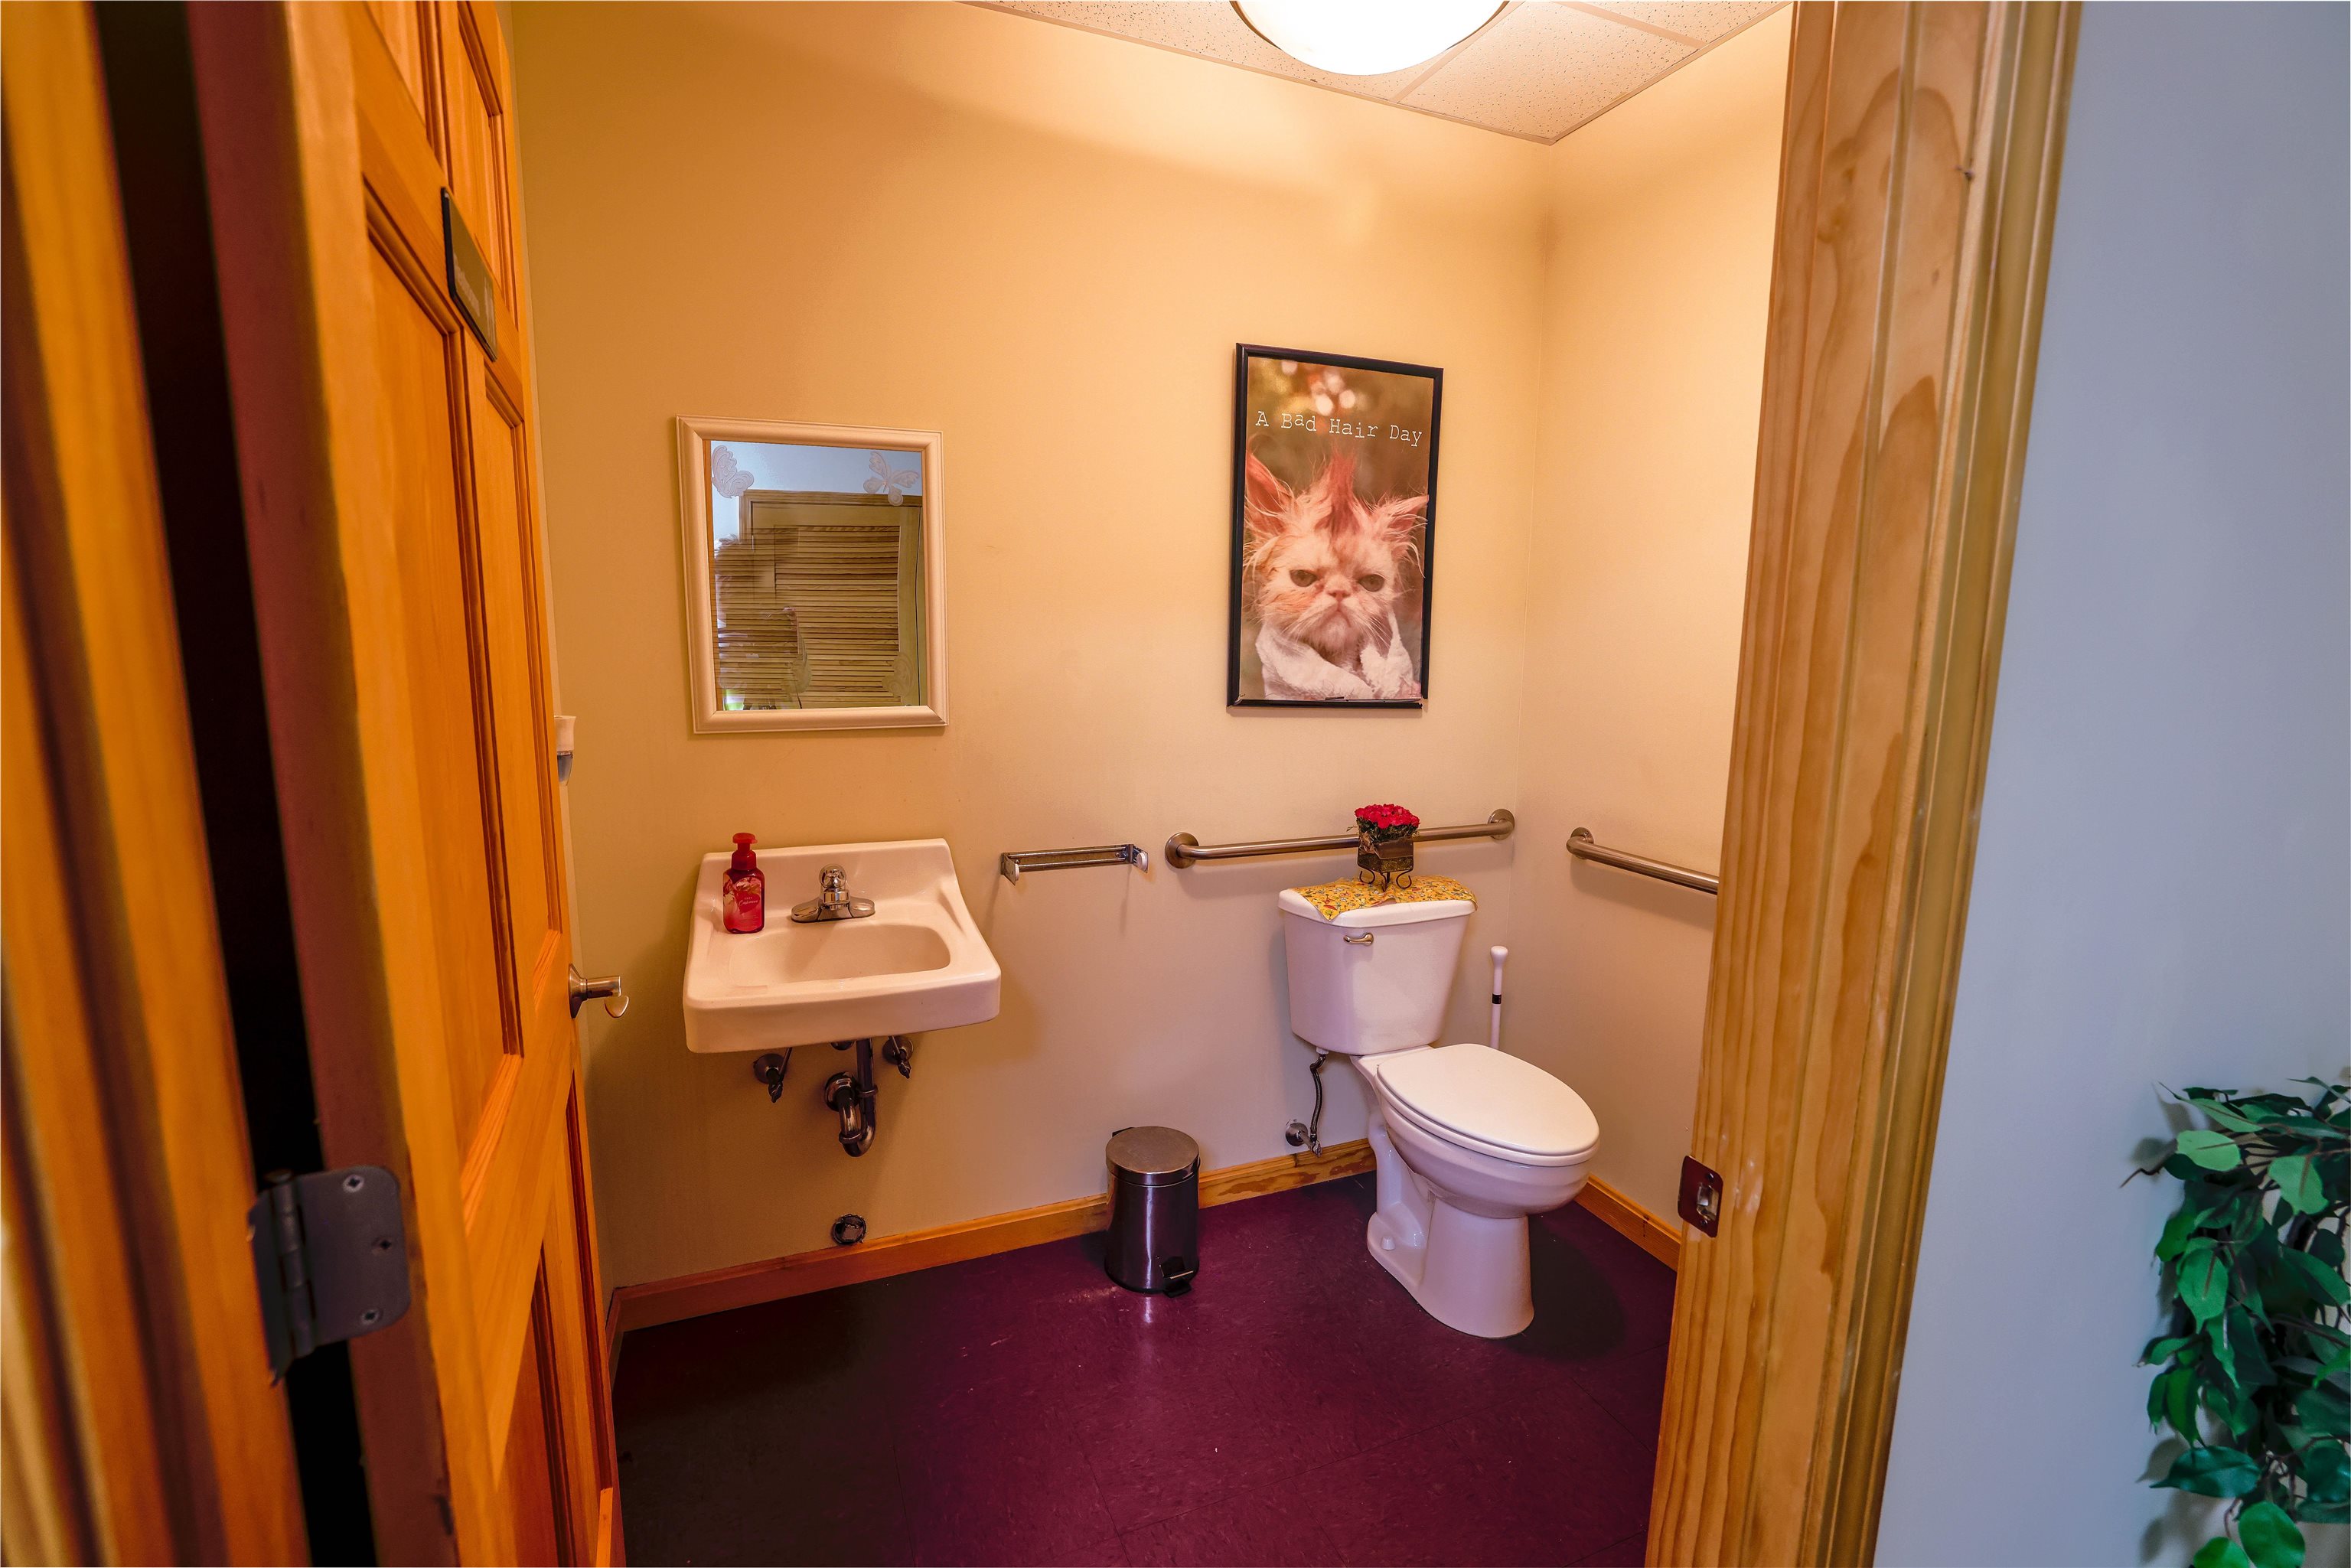 Bathroom Unit 1 and shared with Unit 2